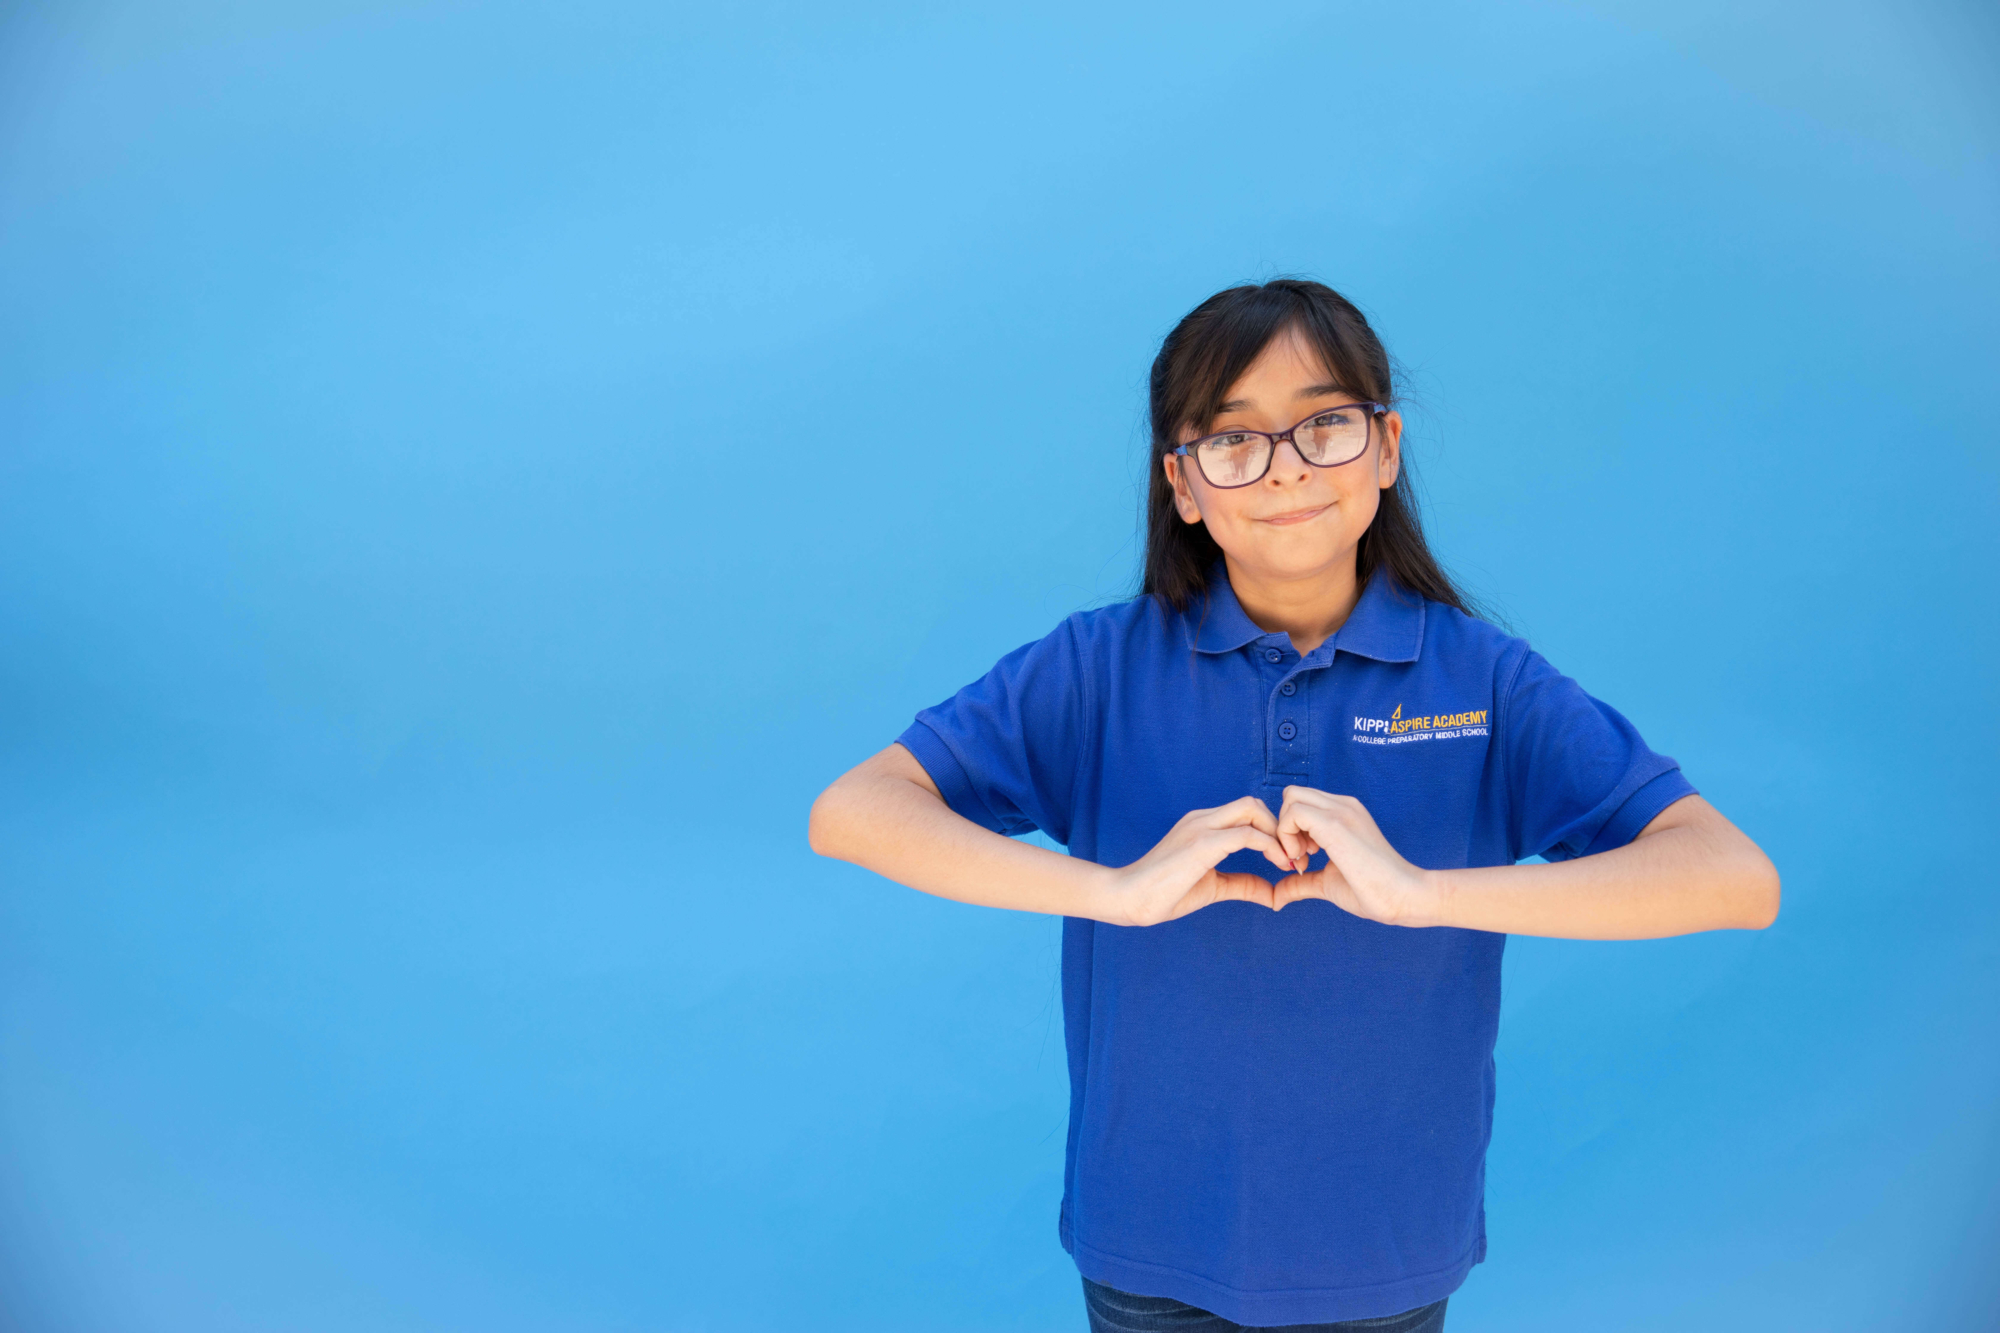 KIPP Texas Middle School Student with Heart Hand Sign